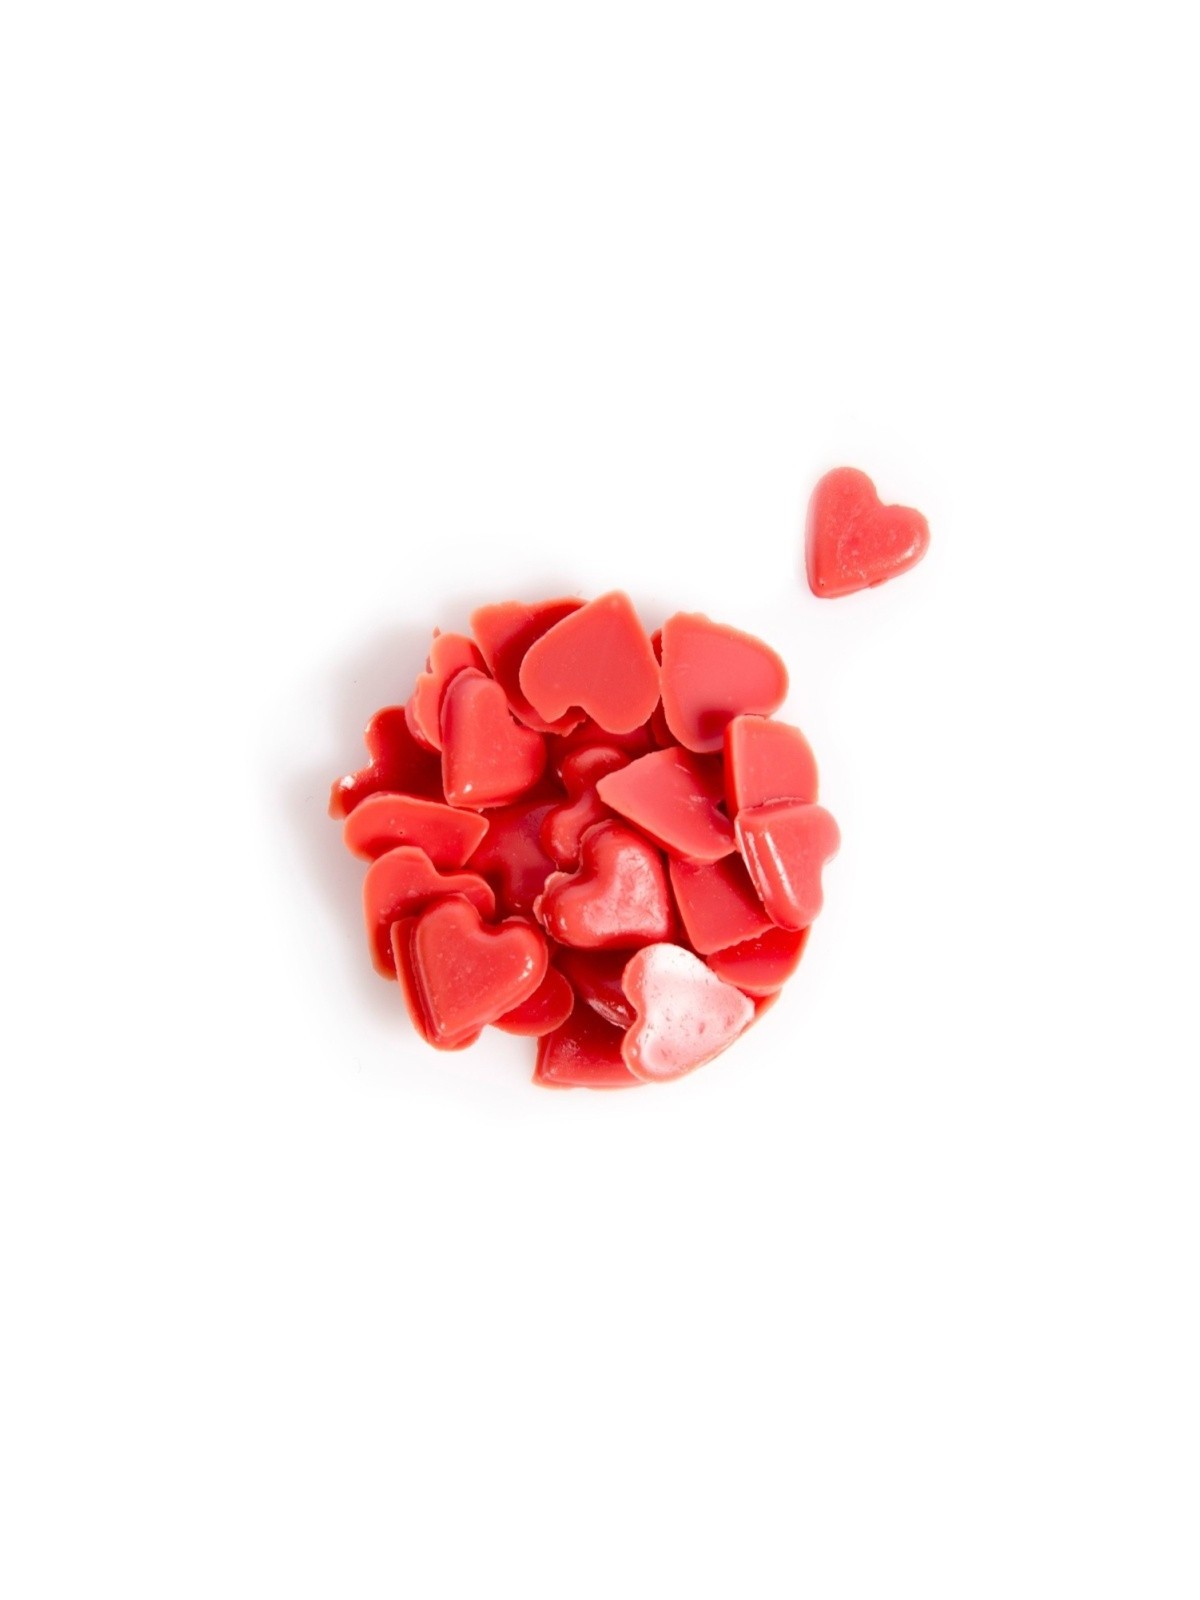 Chocolate decoration - red hearts 10mm - 50g